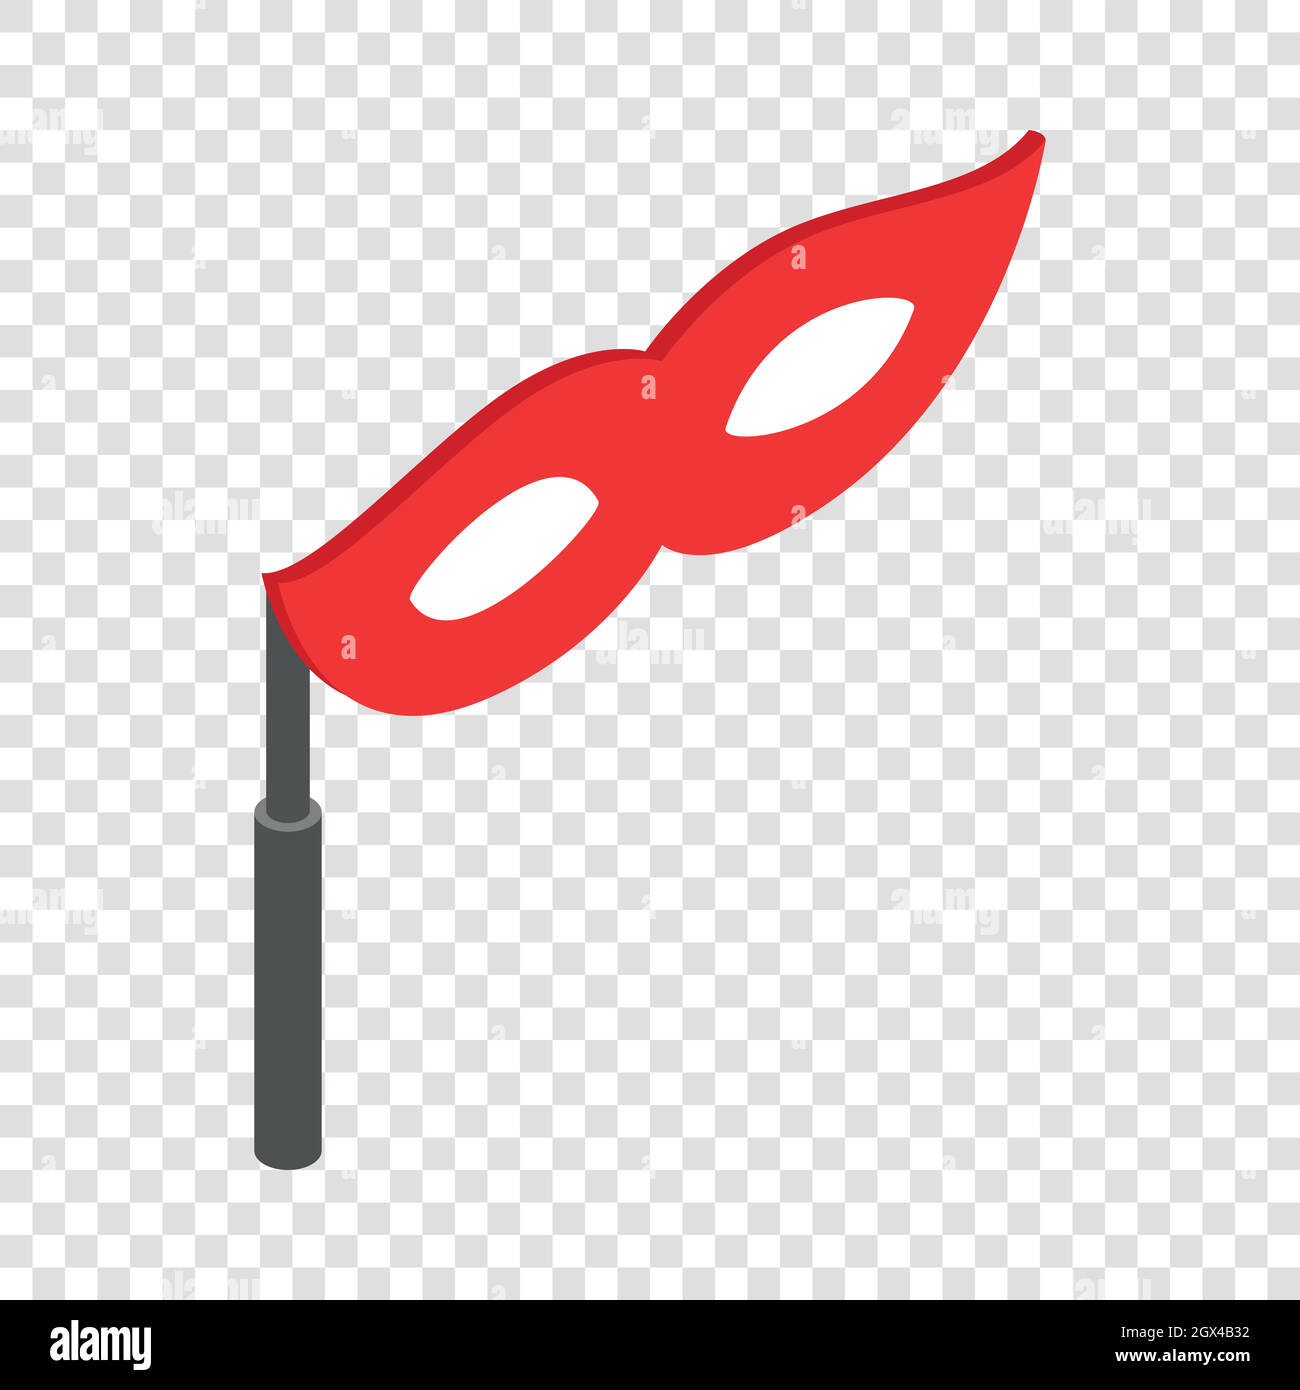 Red theatrical mask isometric icon Stock Vector